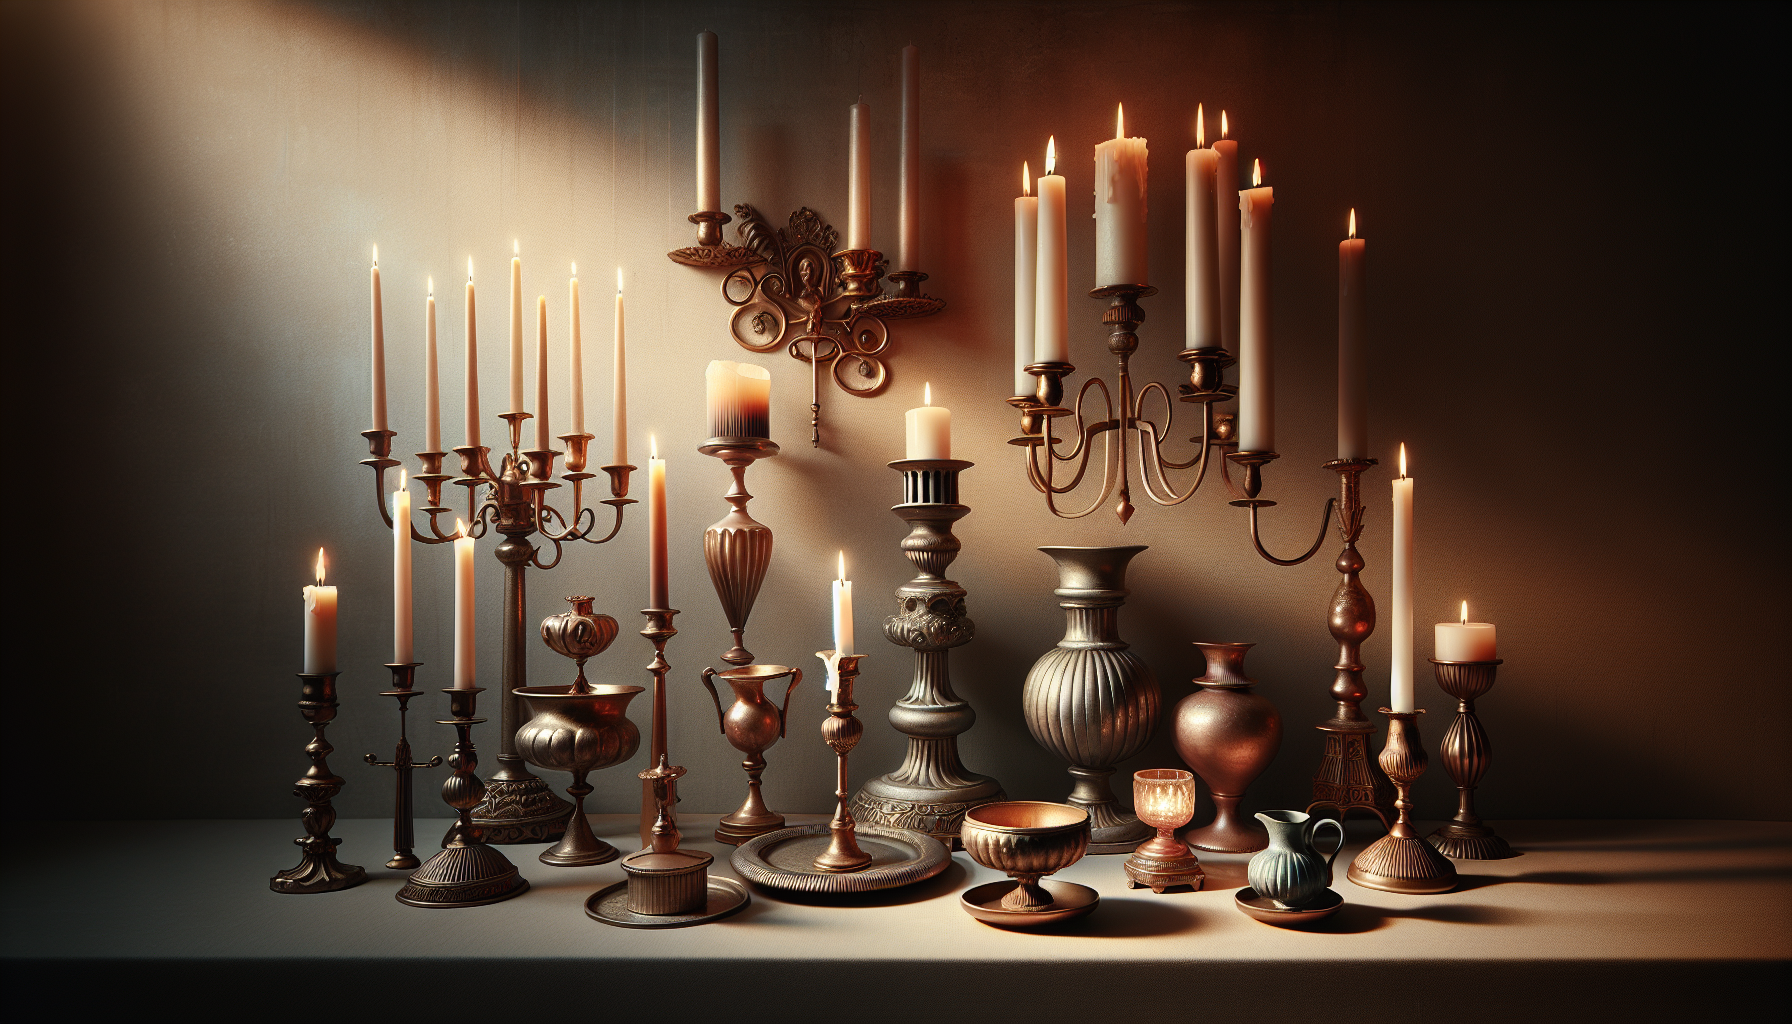 Illustration of different types of candle holders